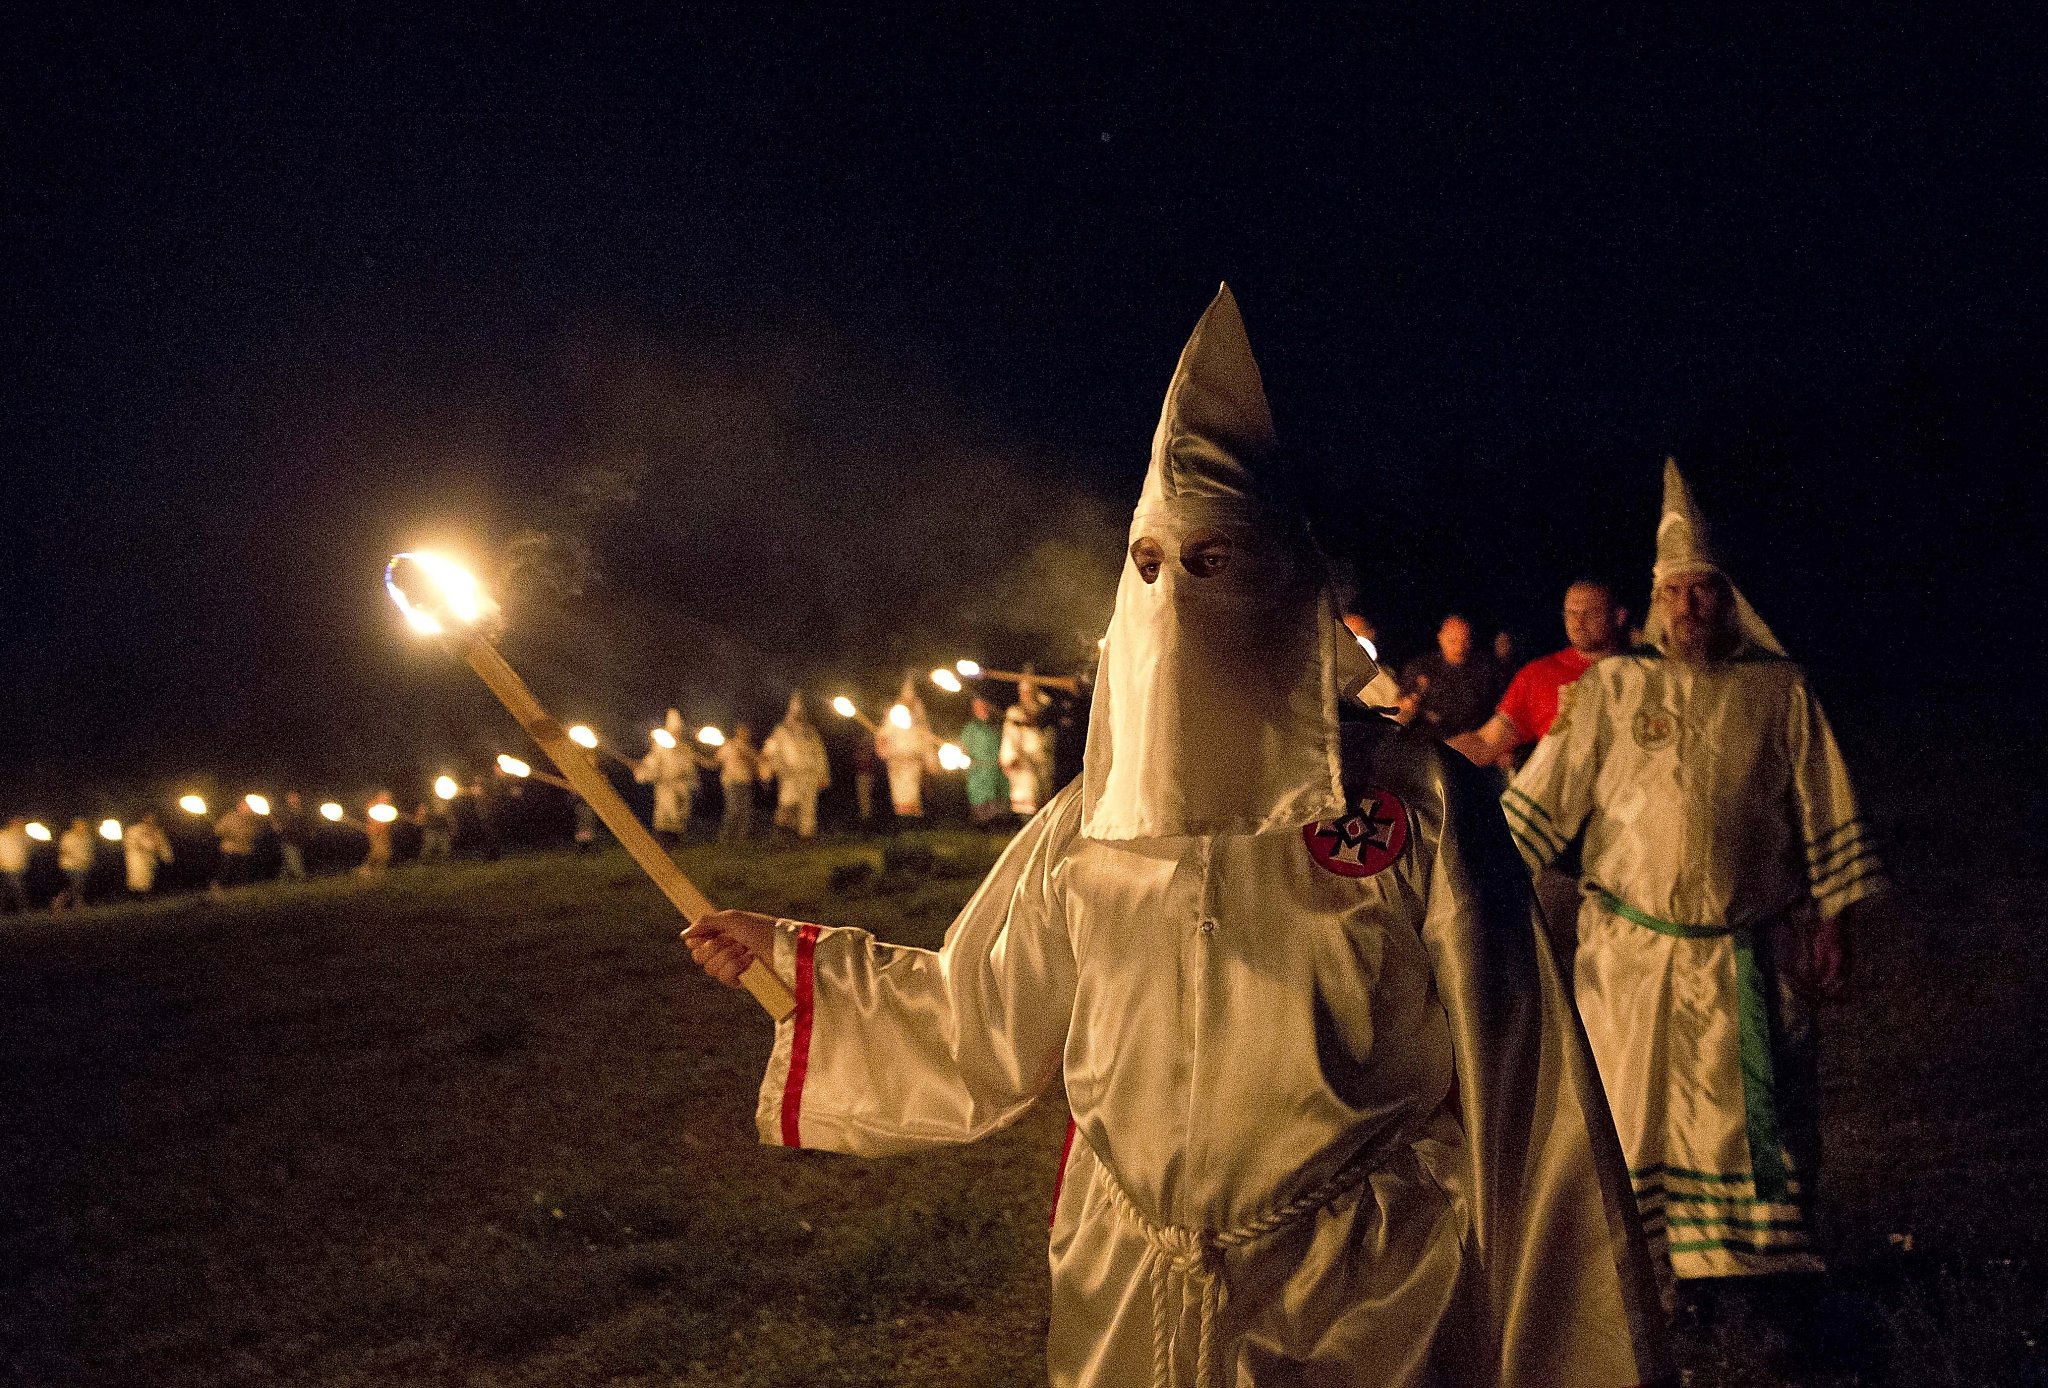 On its 150th anniversary, the Ku Klux Klan aims to rise again SFGate